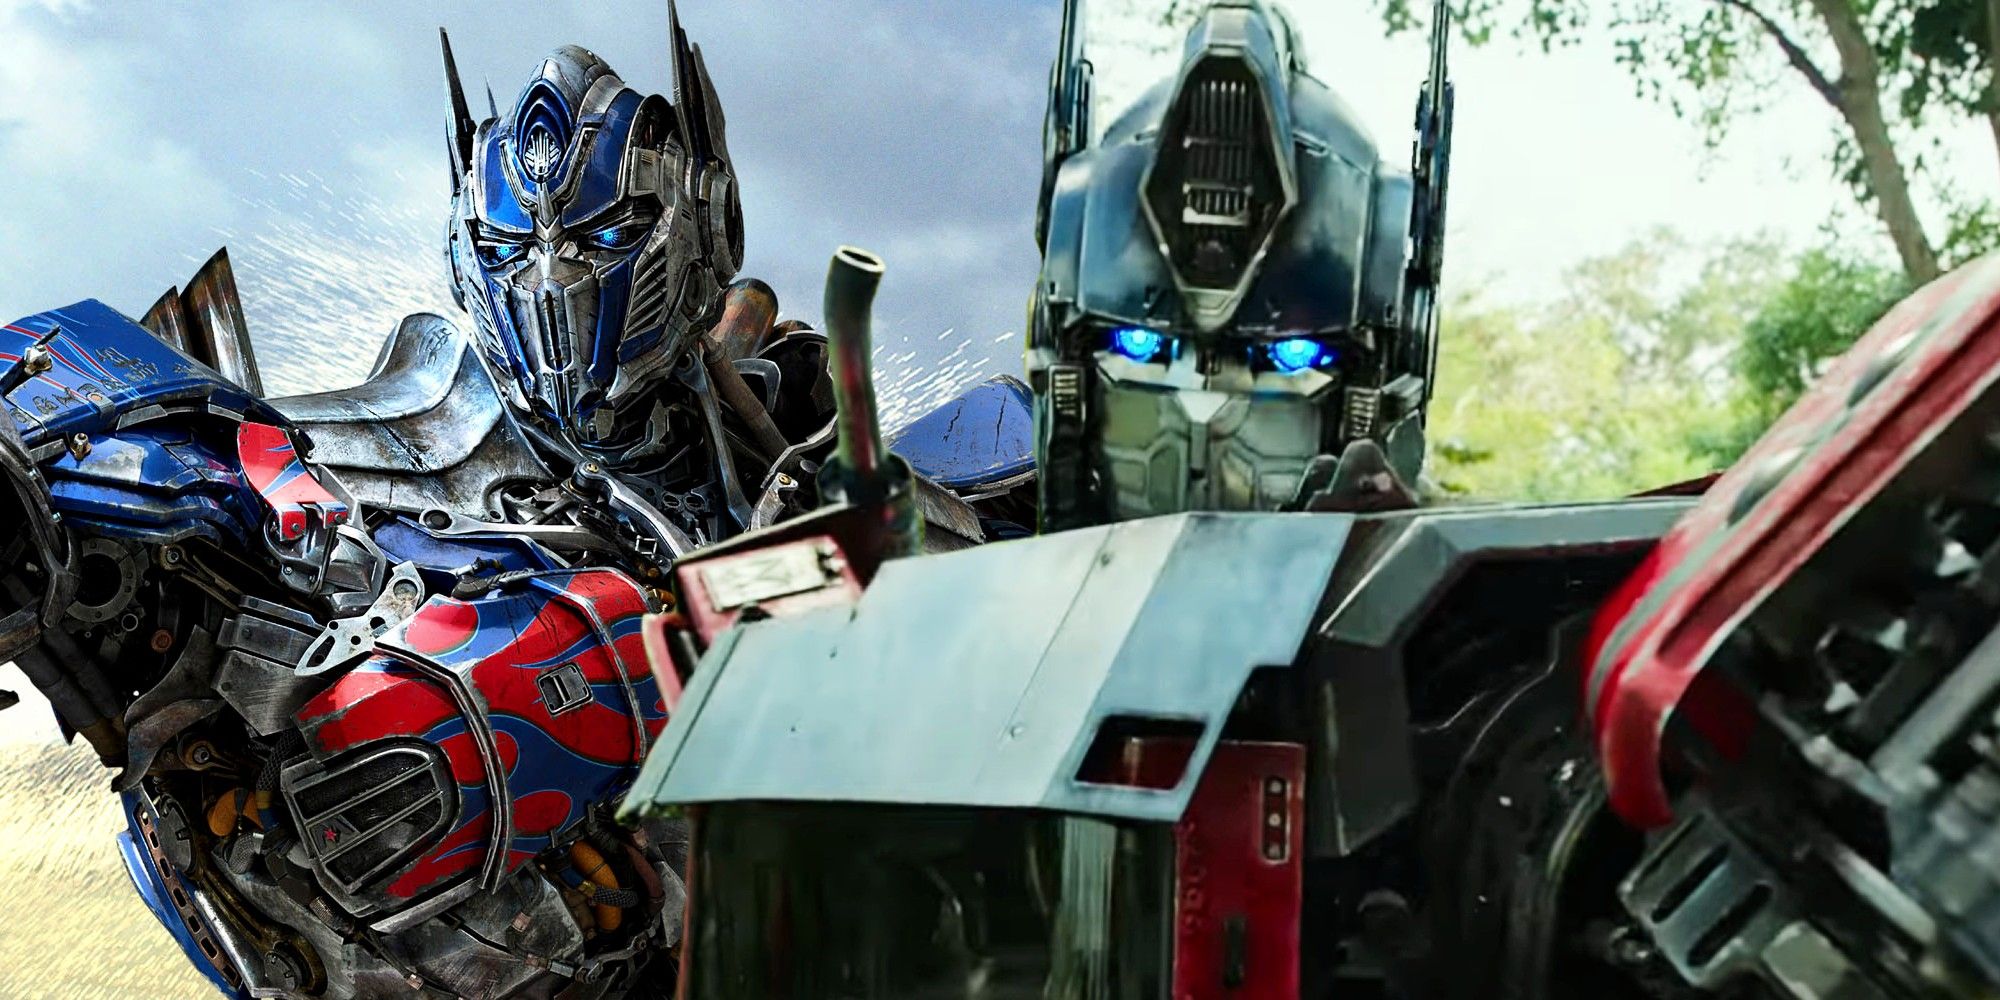 Rise of the Beasts Confirms Bumblebee Is the Most Important Autobot